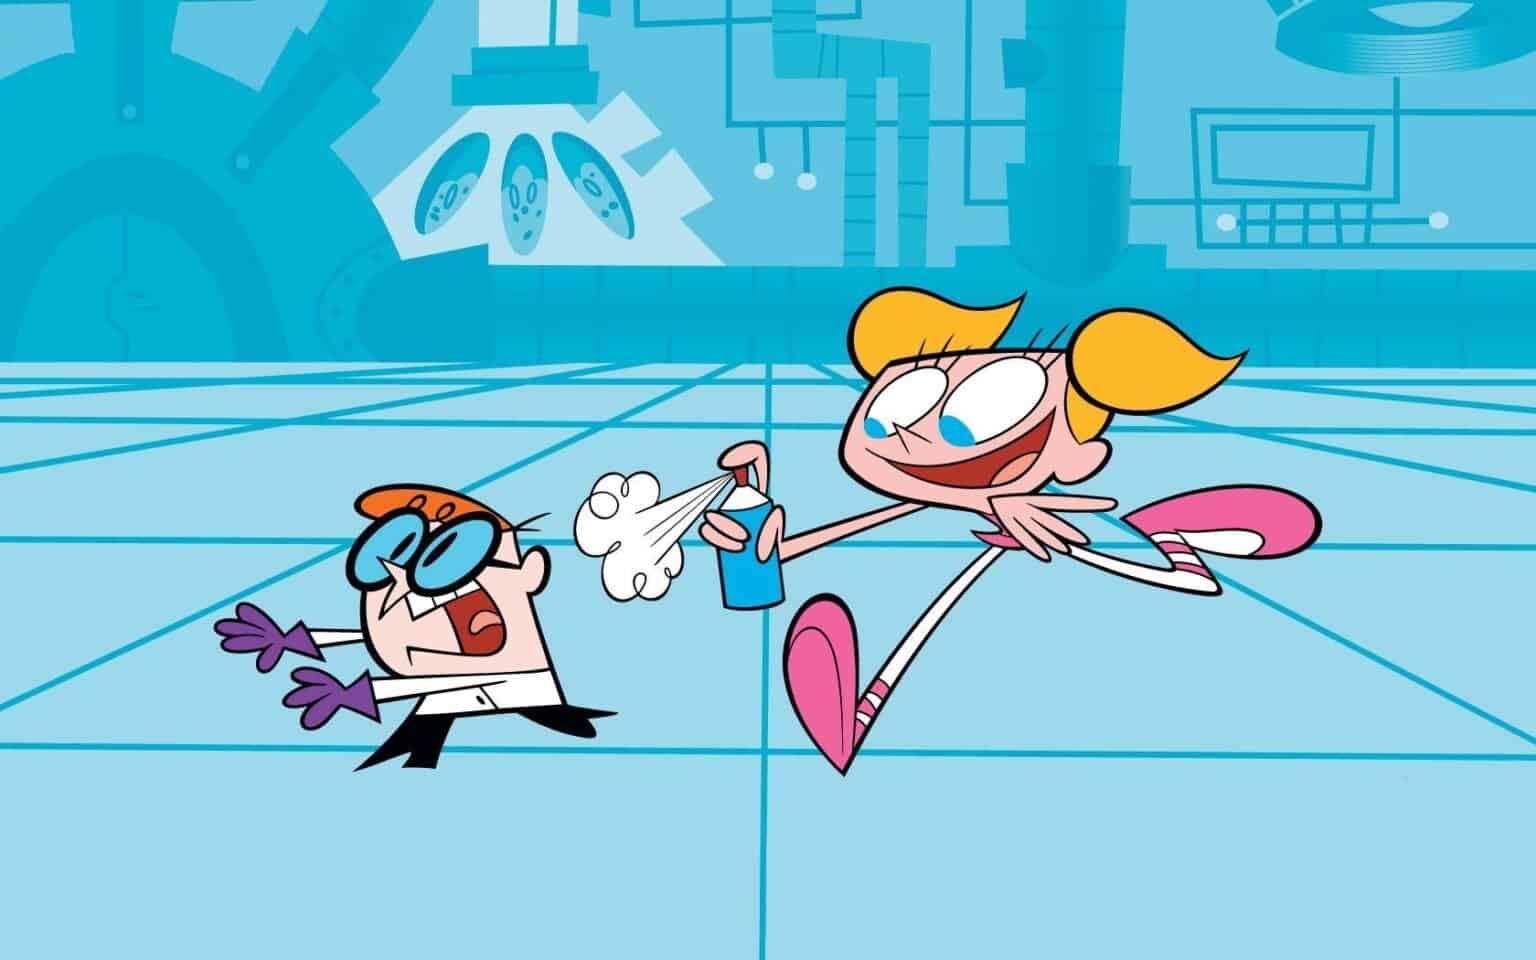 Why Dexter S Laboratory Deserves A Live Action TV Show Fortress Of